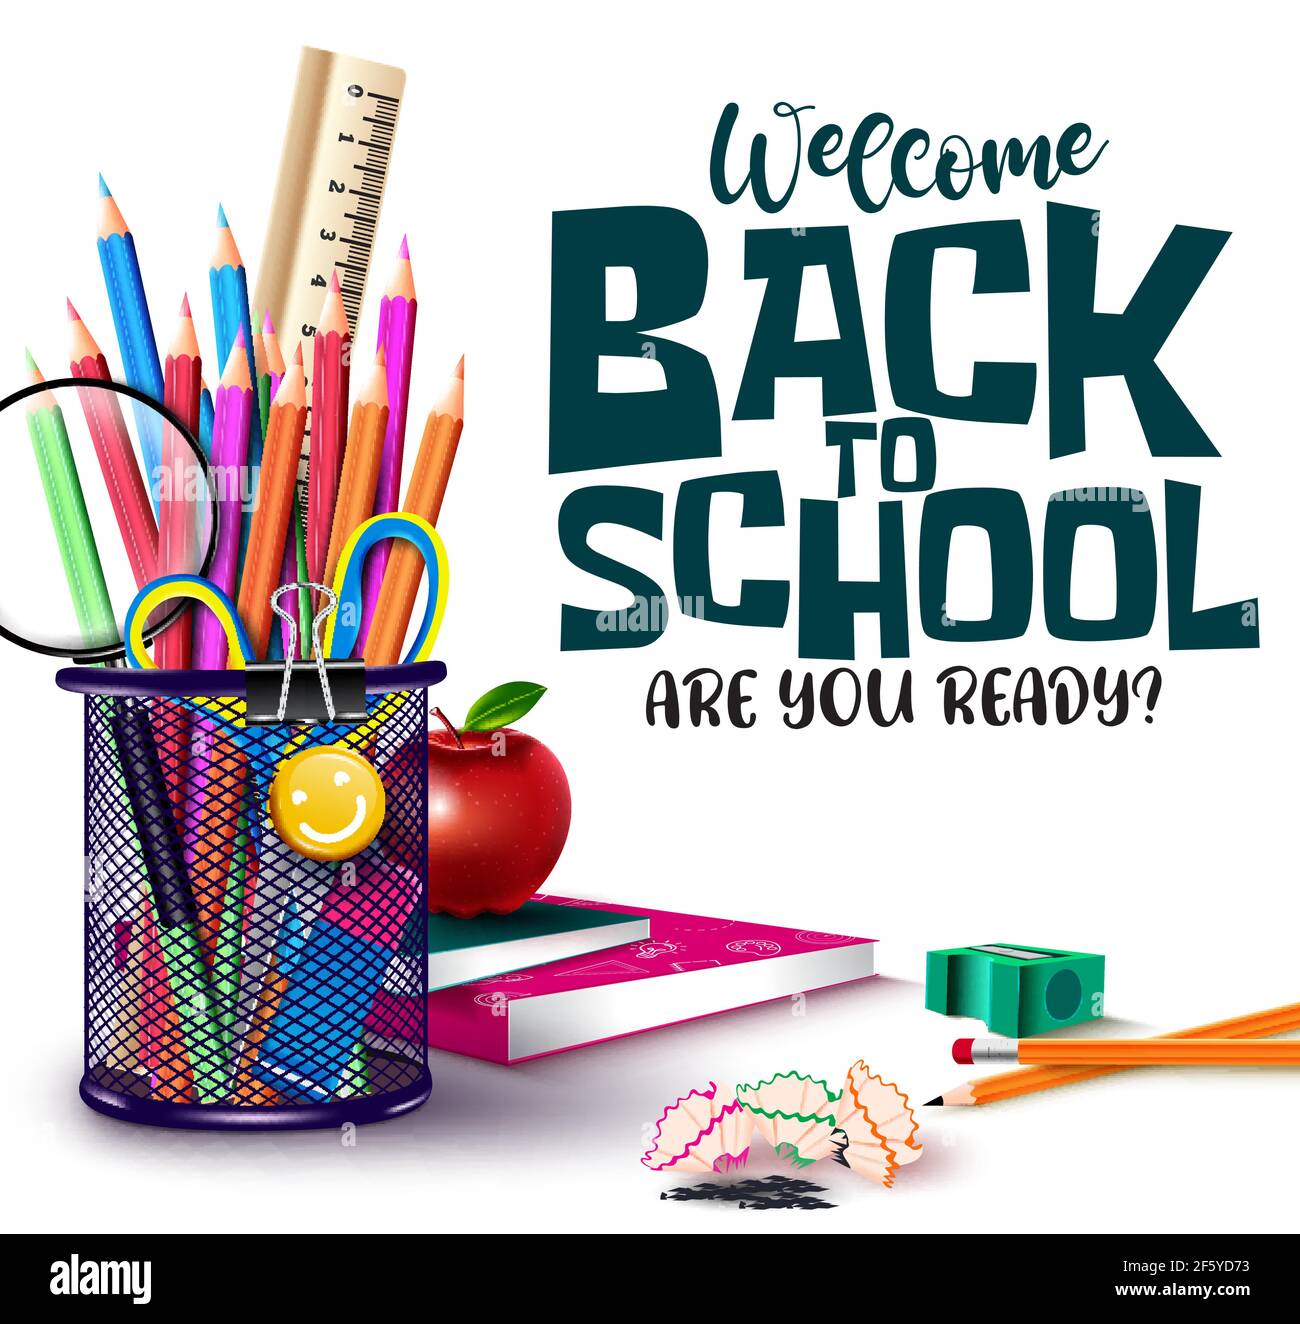 Back to school vector design. Welcome back to school text with student supplies like color pencil, scissor and magnifying glass elements for education. Stock Vector